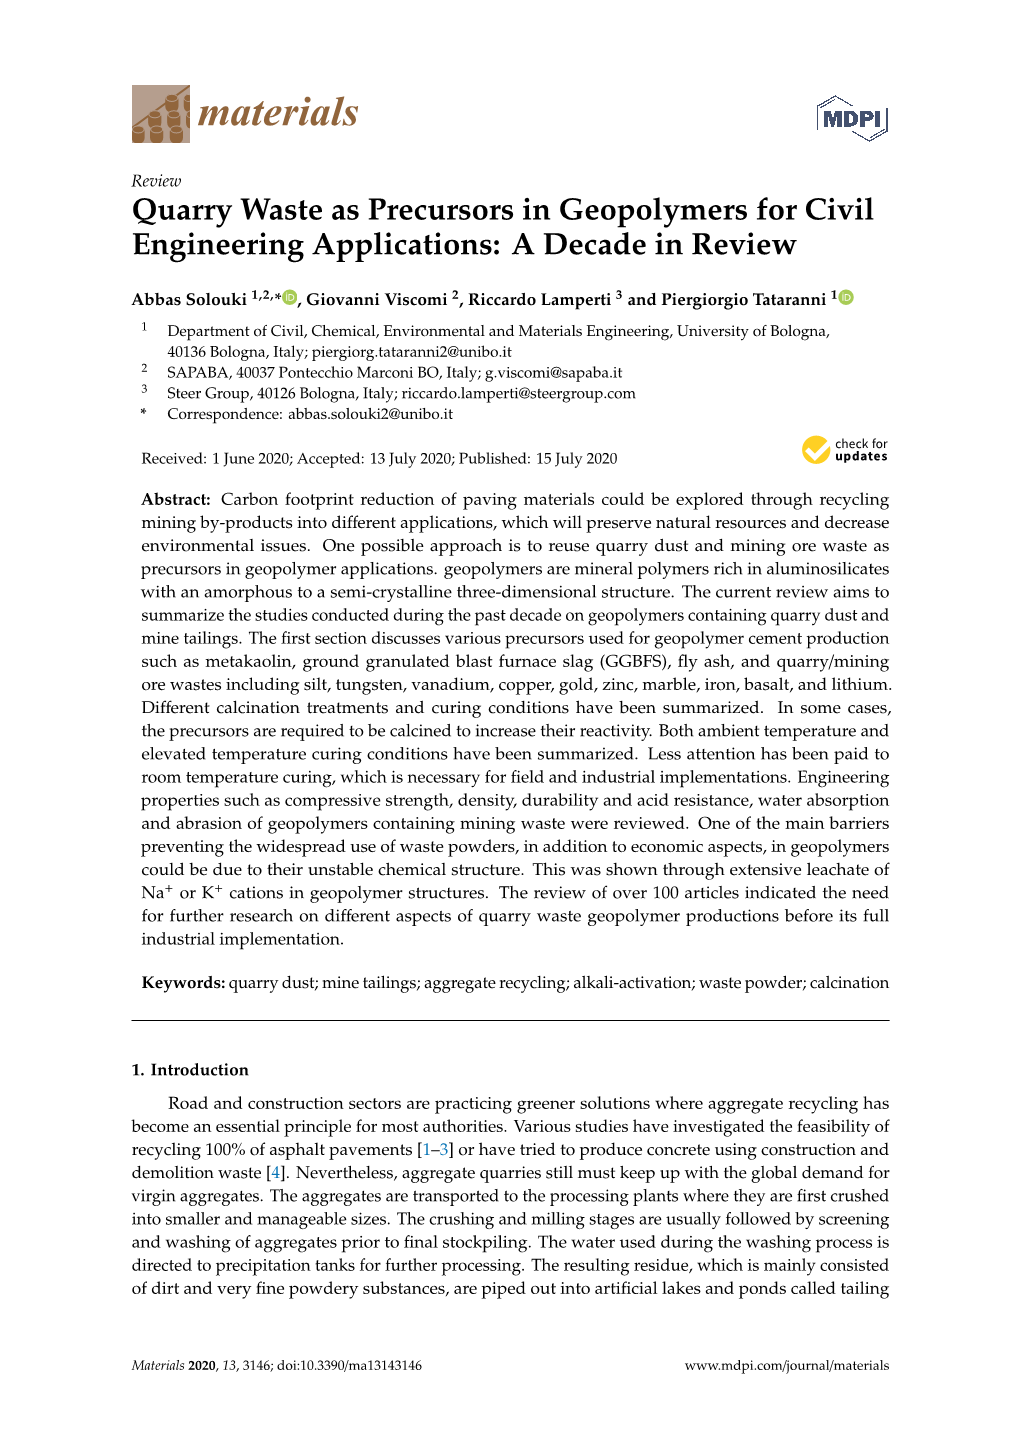 Quarry Waste As Precursors in Geopolymers for Civil Engineering Applications: a Decade in Review